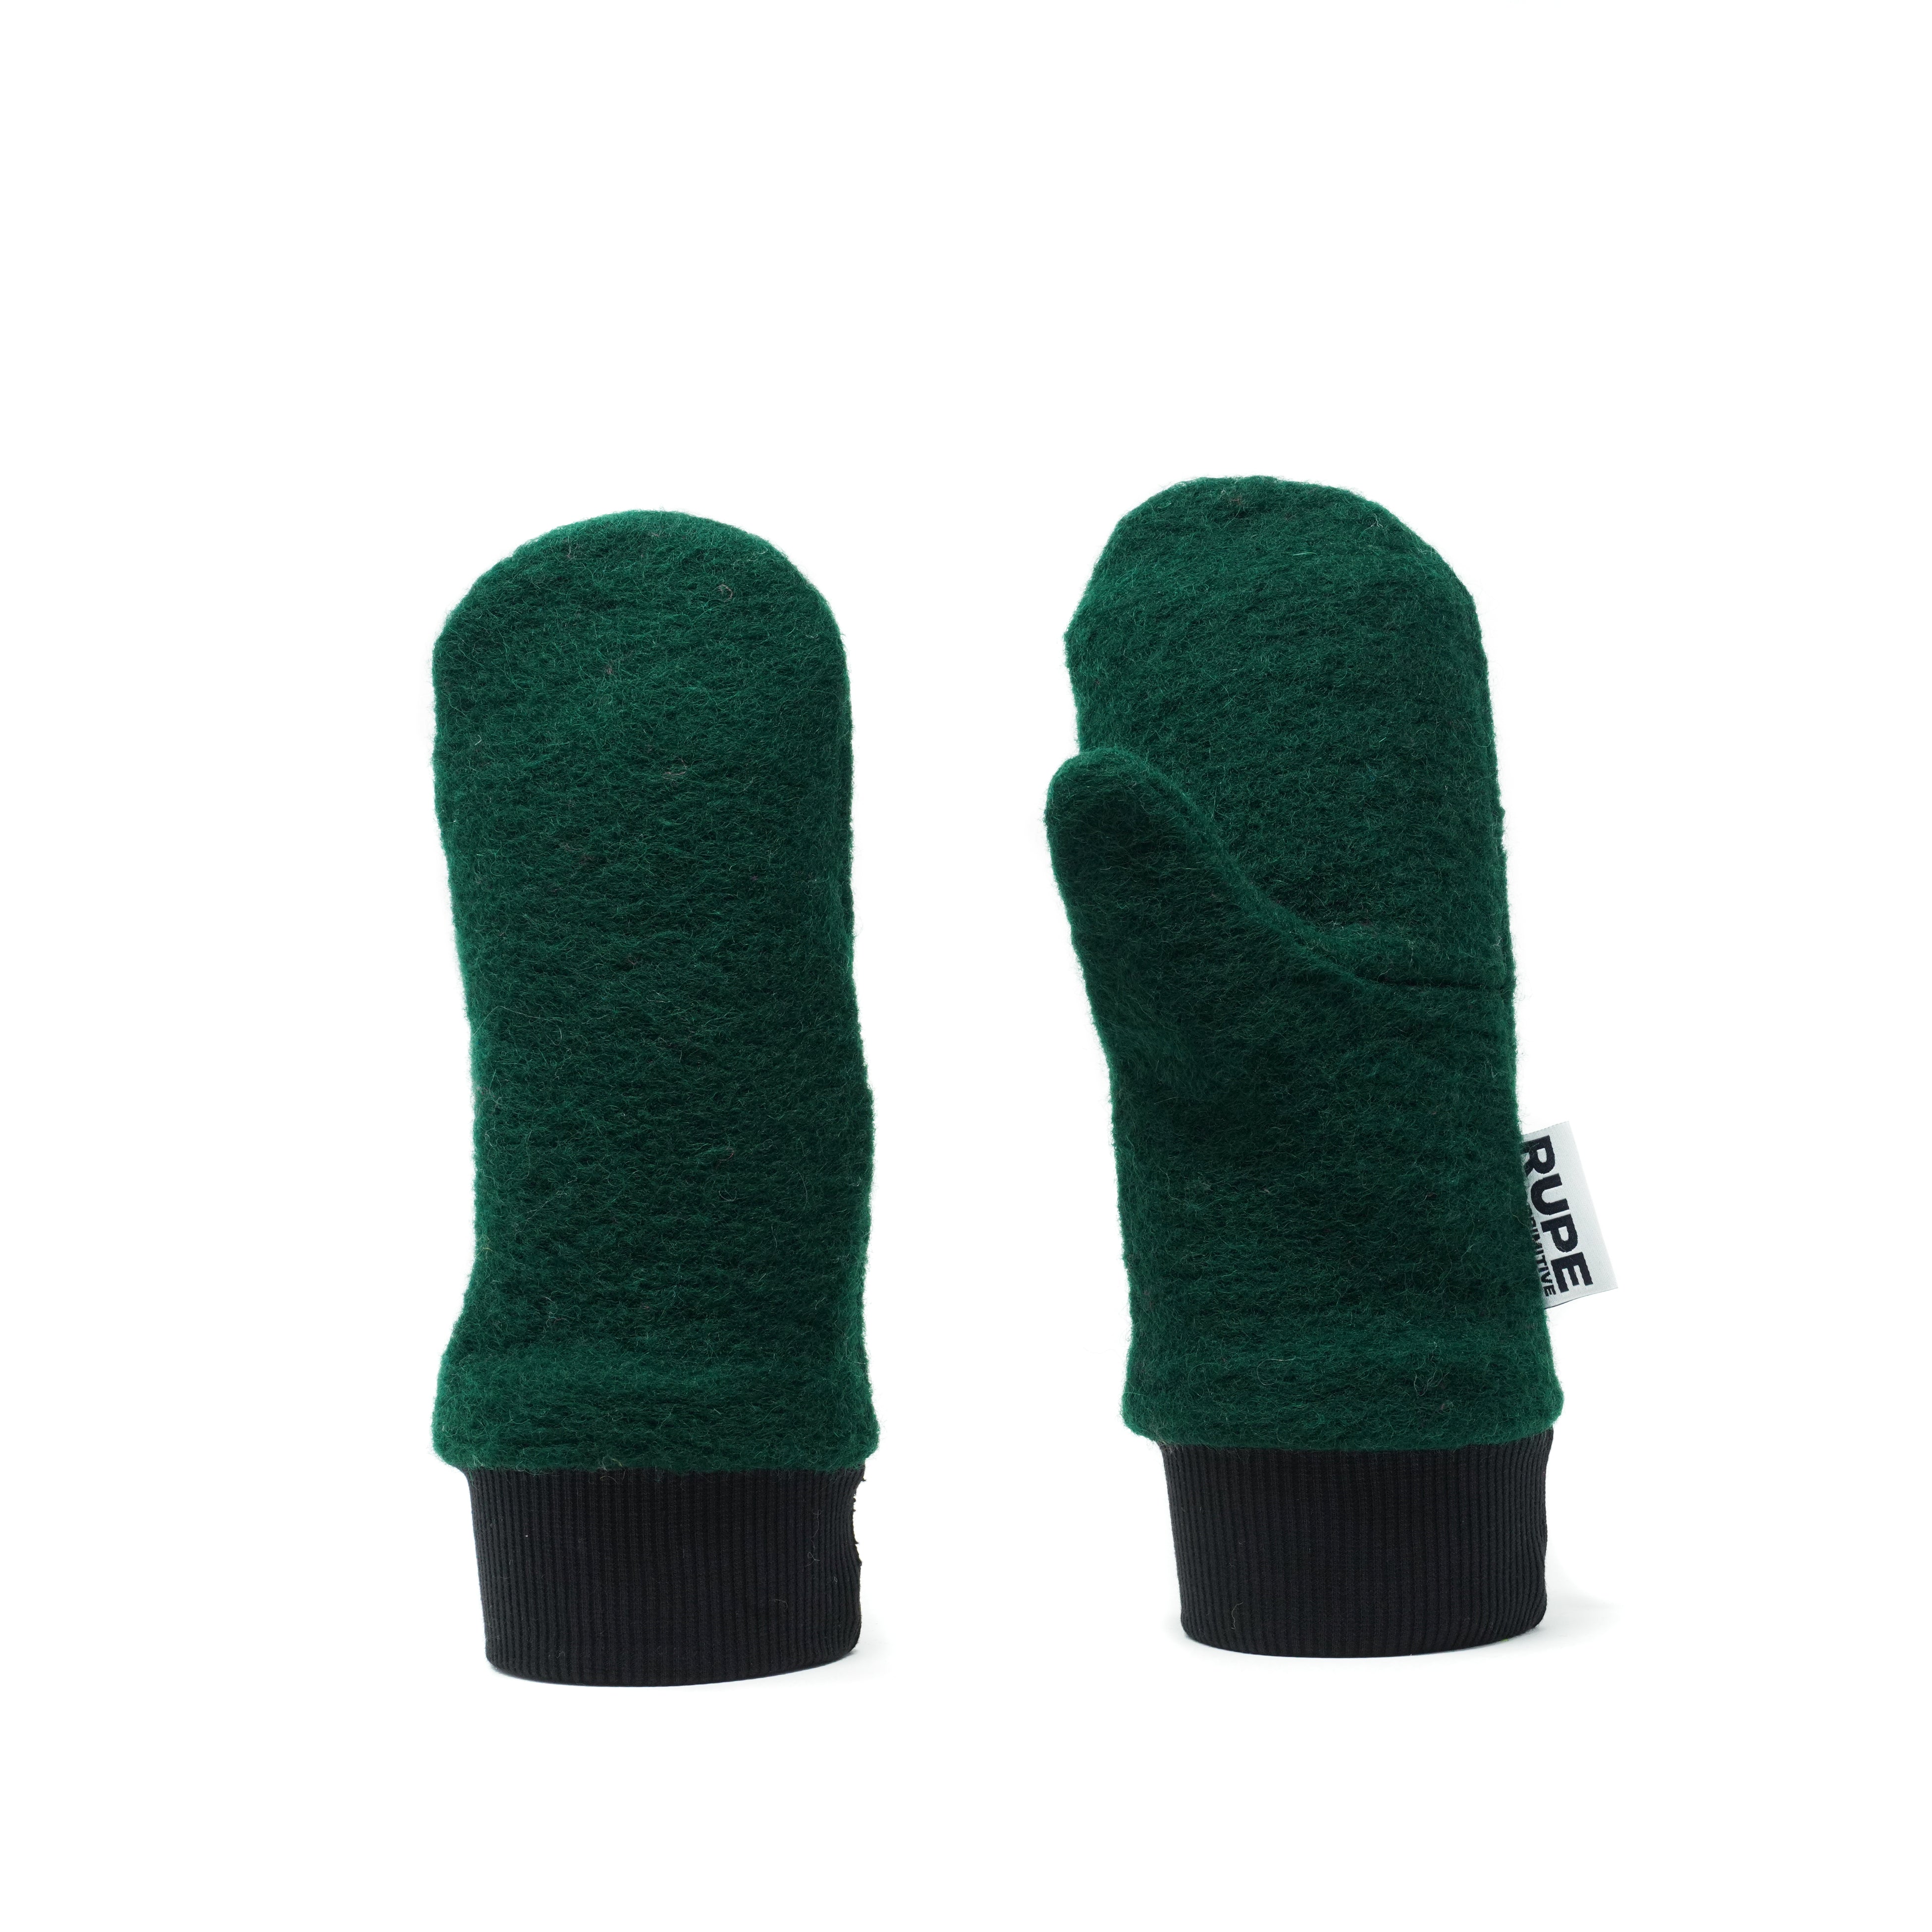 MITTENS - LIMITED EDITION - Green 